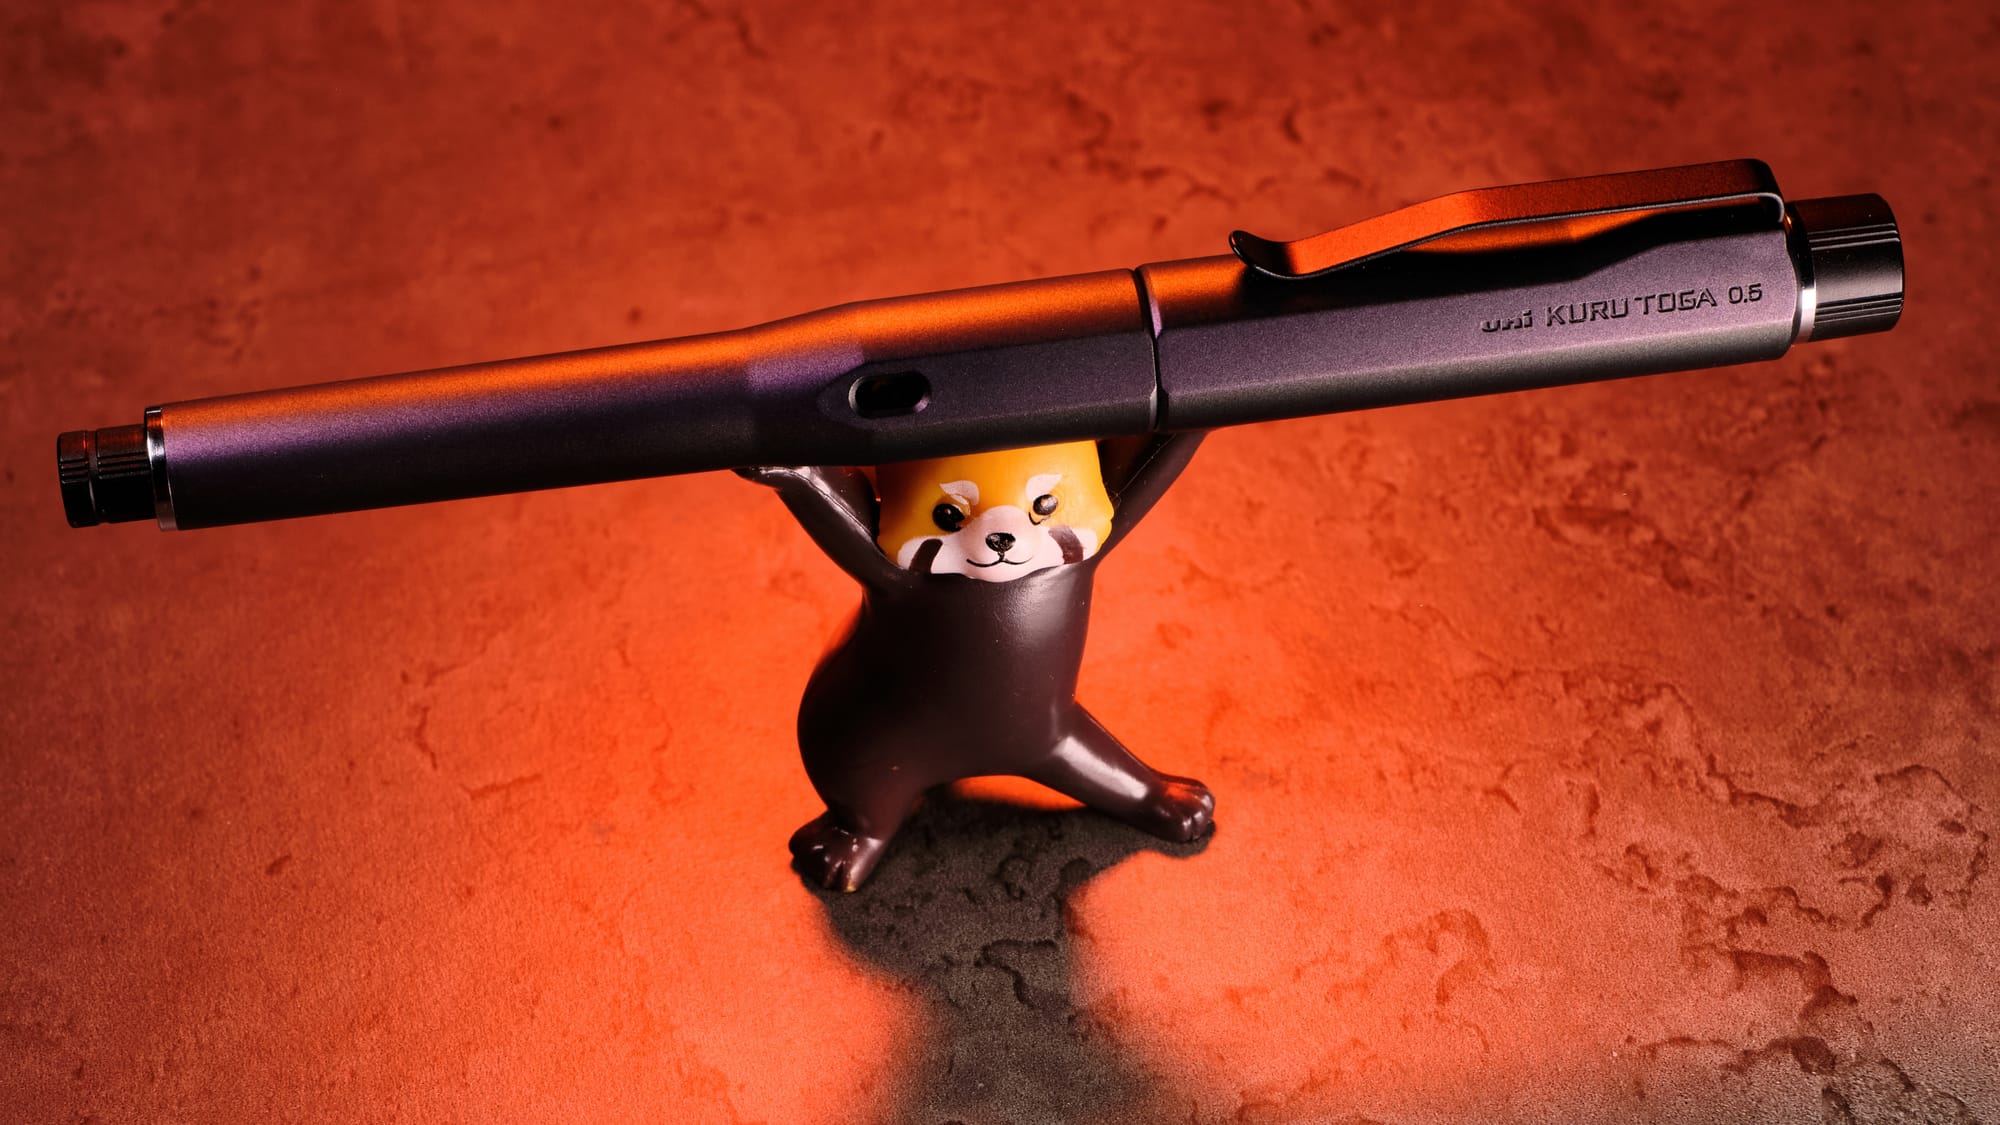 Photo of the Kuru Toga Dive being held up by a Red Panda figure, with an orange marbled background